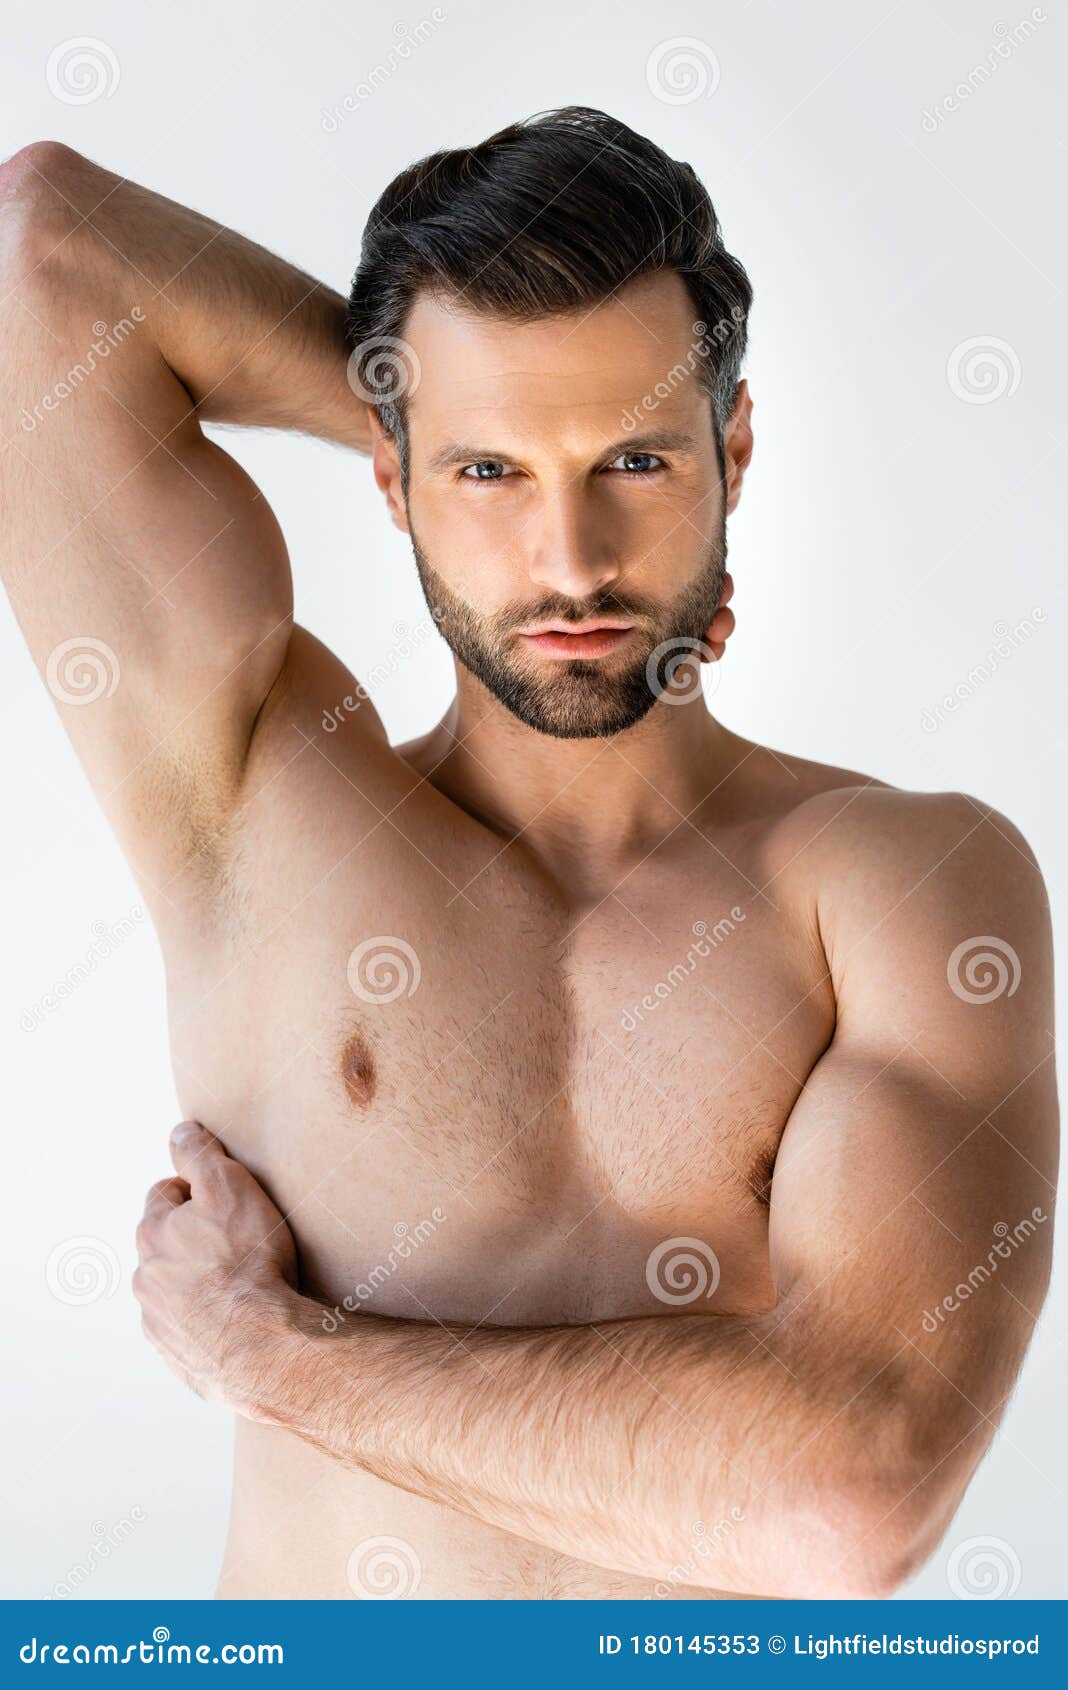 Shirtless Tattooed Man Standing Arms Crossed Stock Photos 